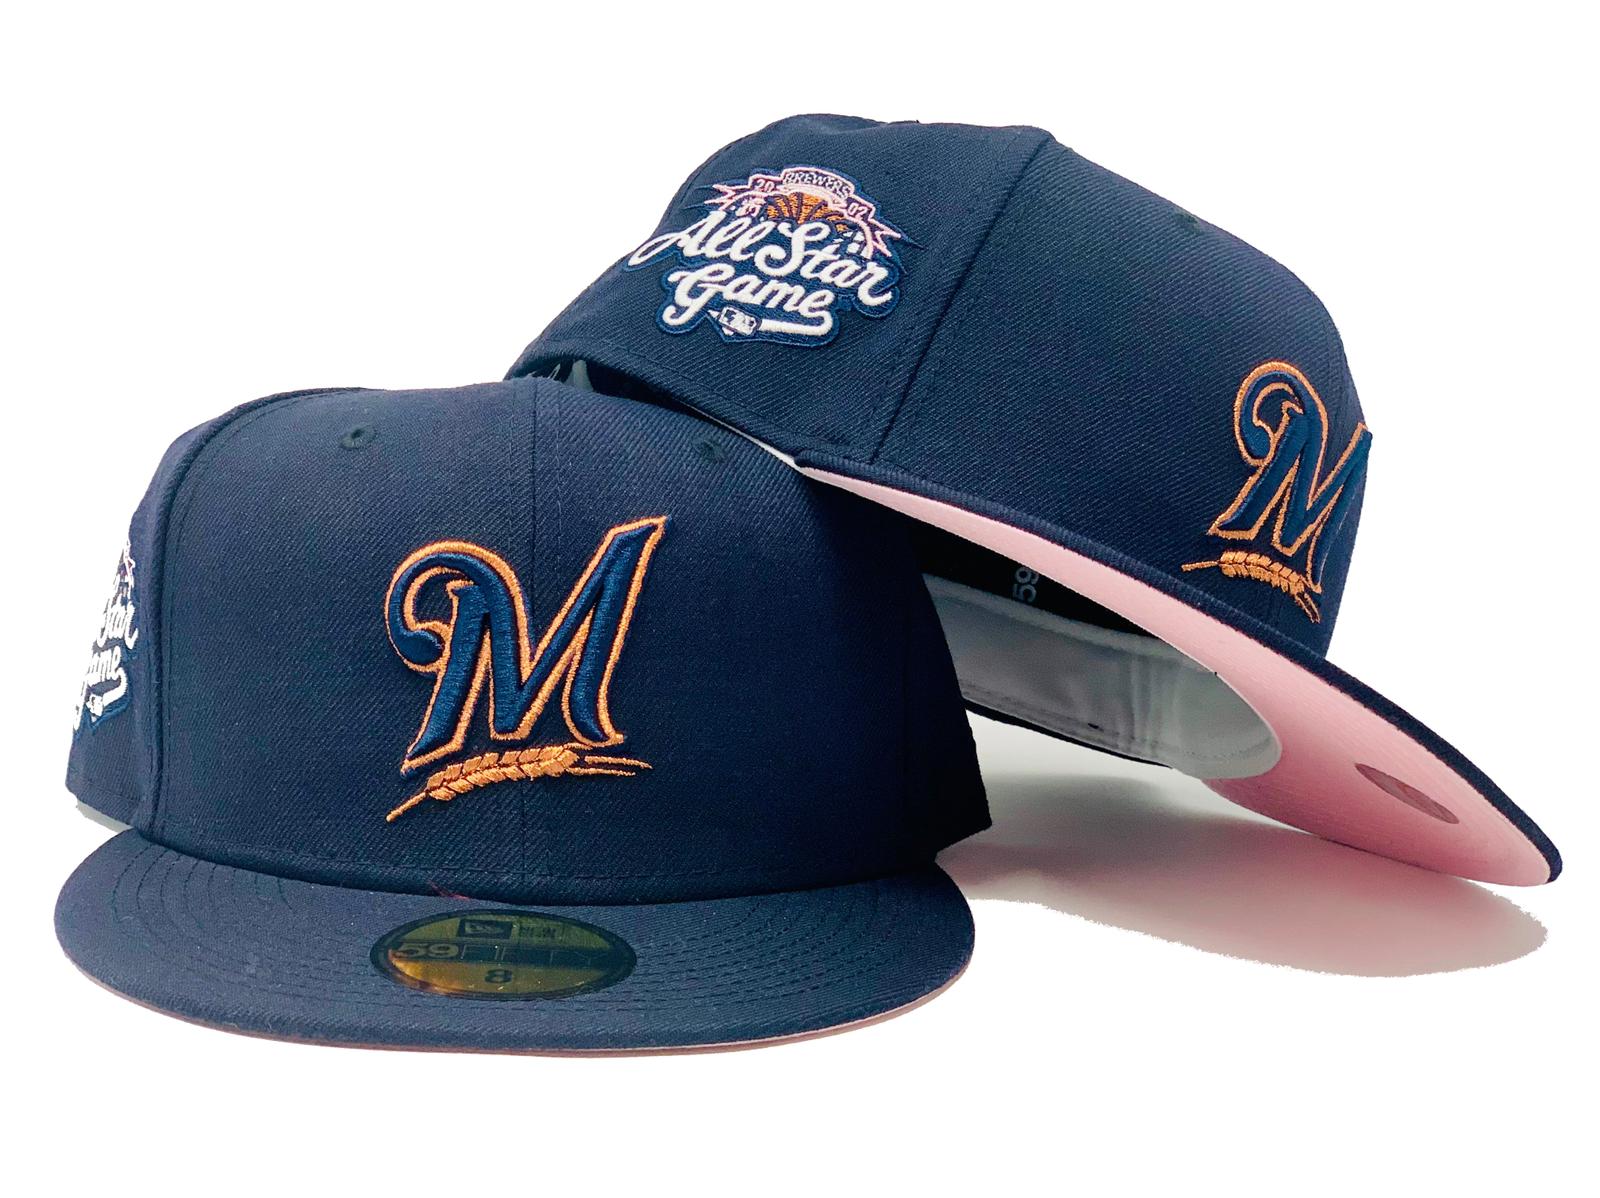 Official Milwaukee Brewers Hats, Brewers Cap, Brewers Hats, Beanies